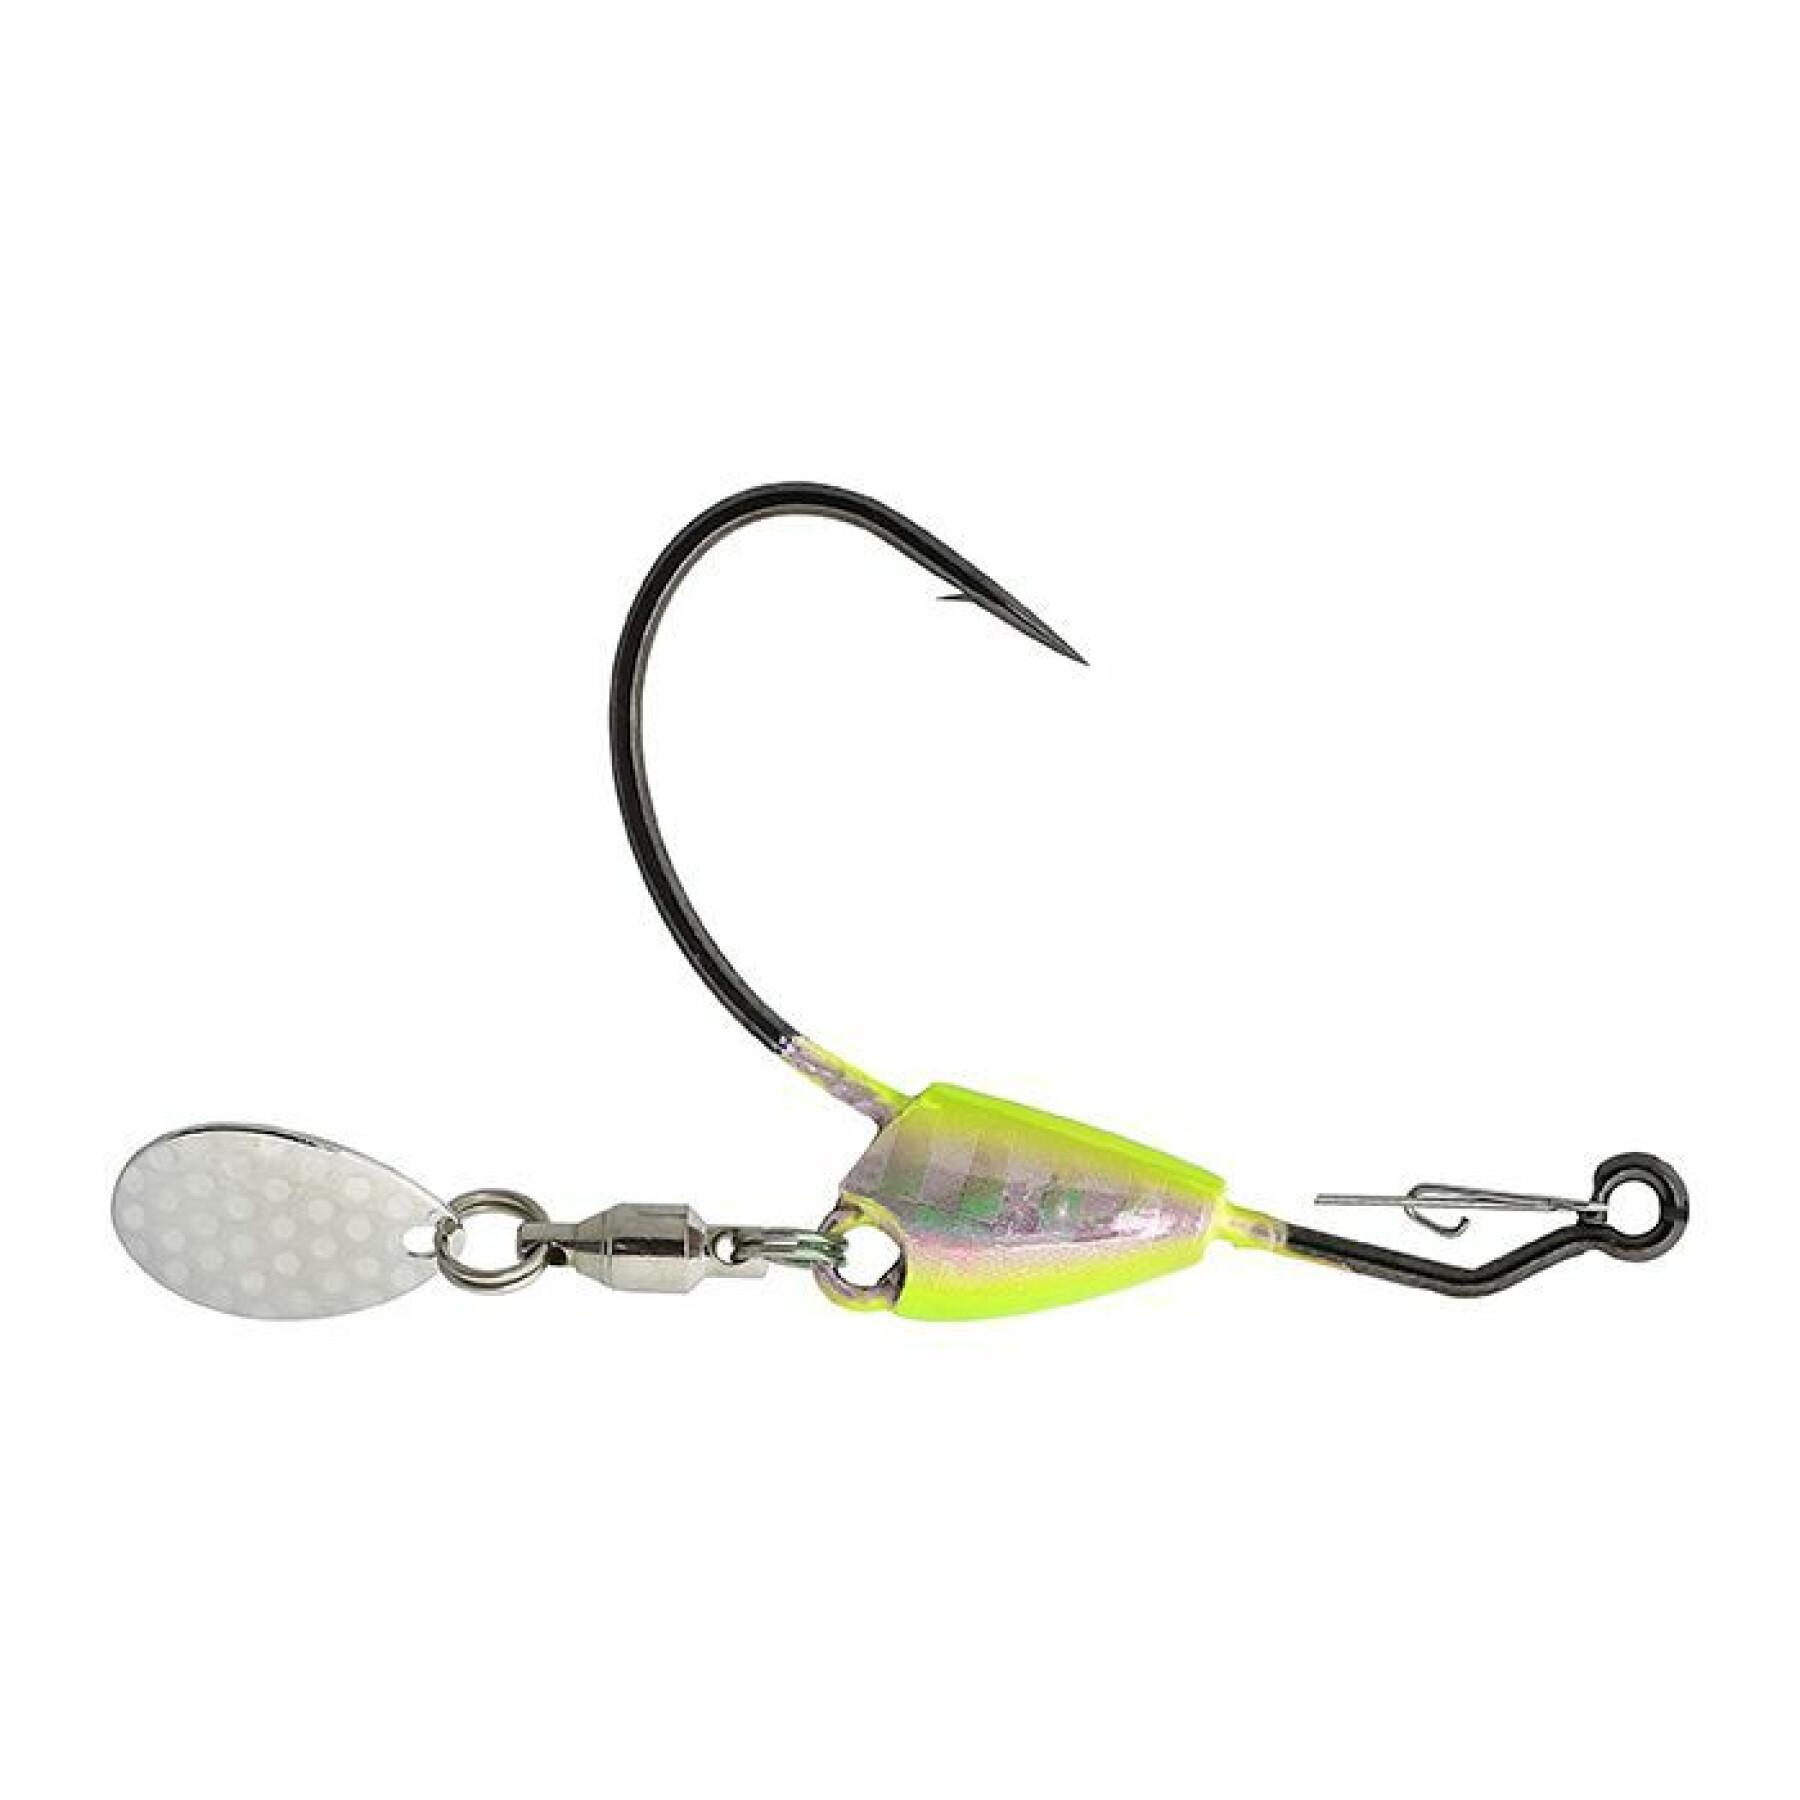 Loodkop Duo Tetra Works The Rock Spin Hook 3,5g